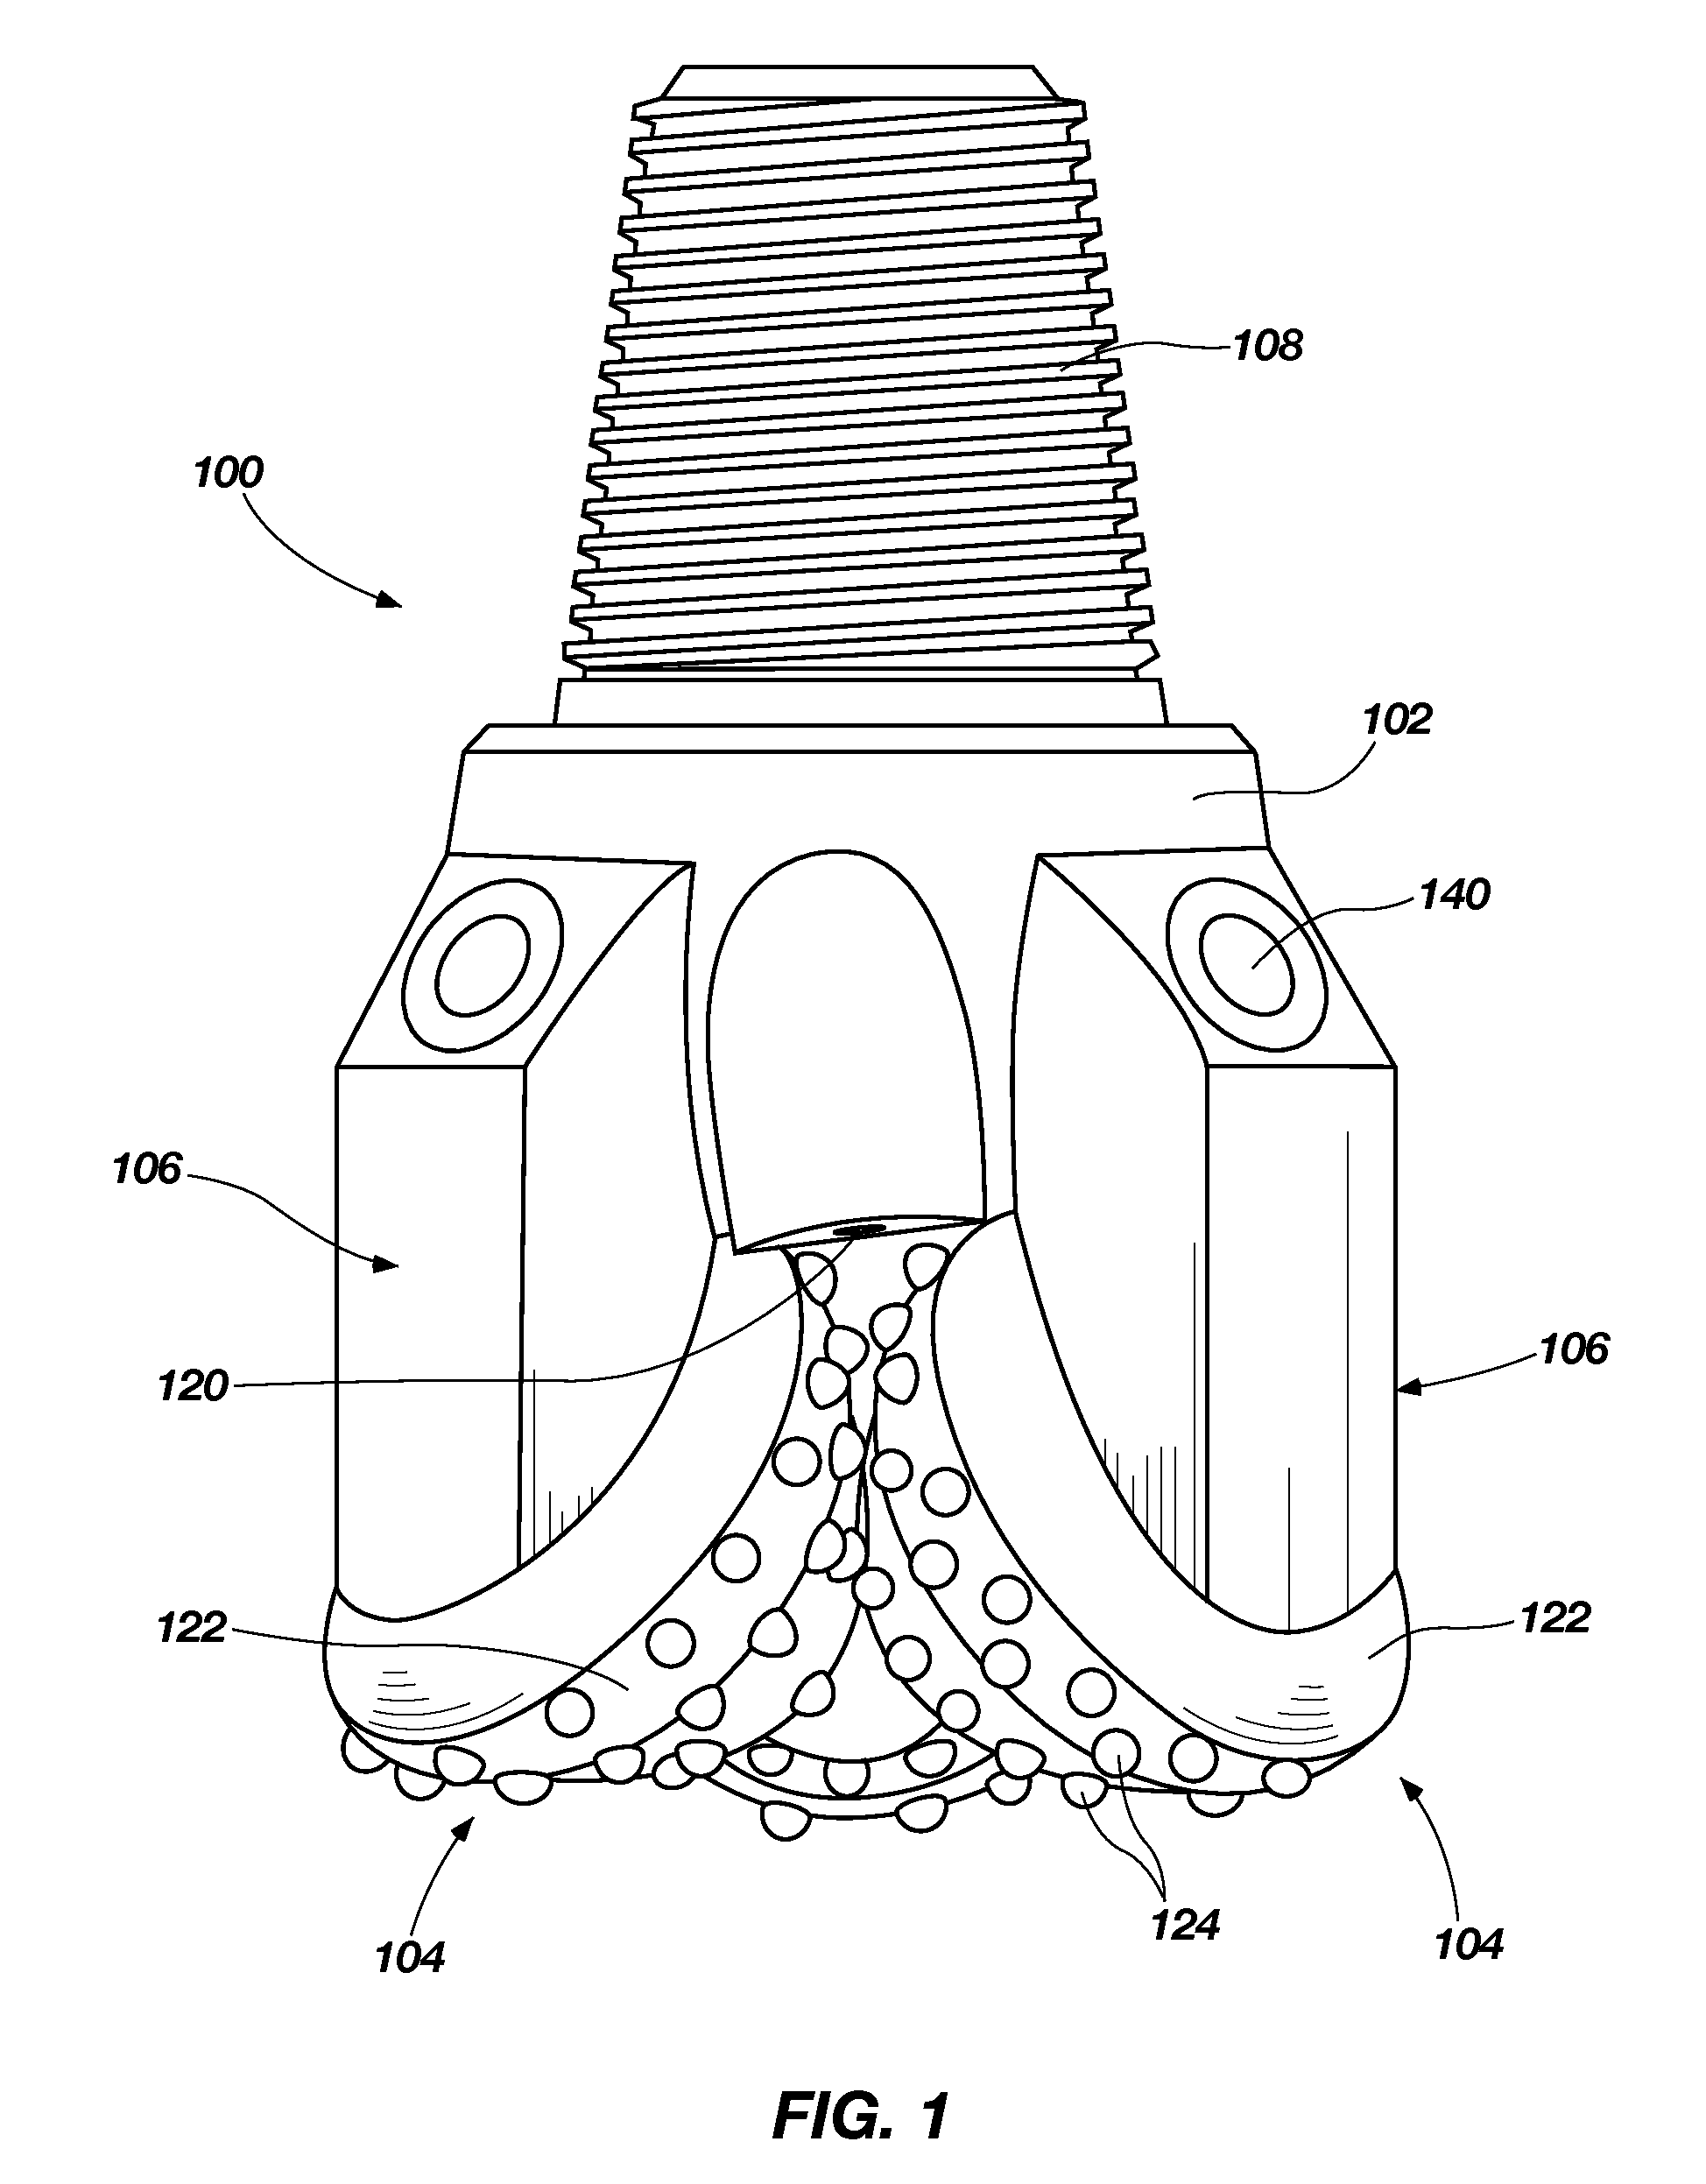 Methods of forming at least a portion of earth-boring tools, and articles formed by such methods